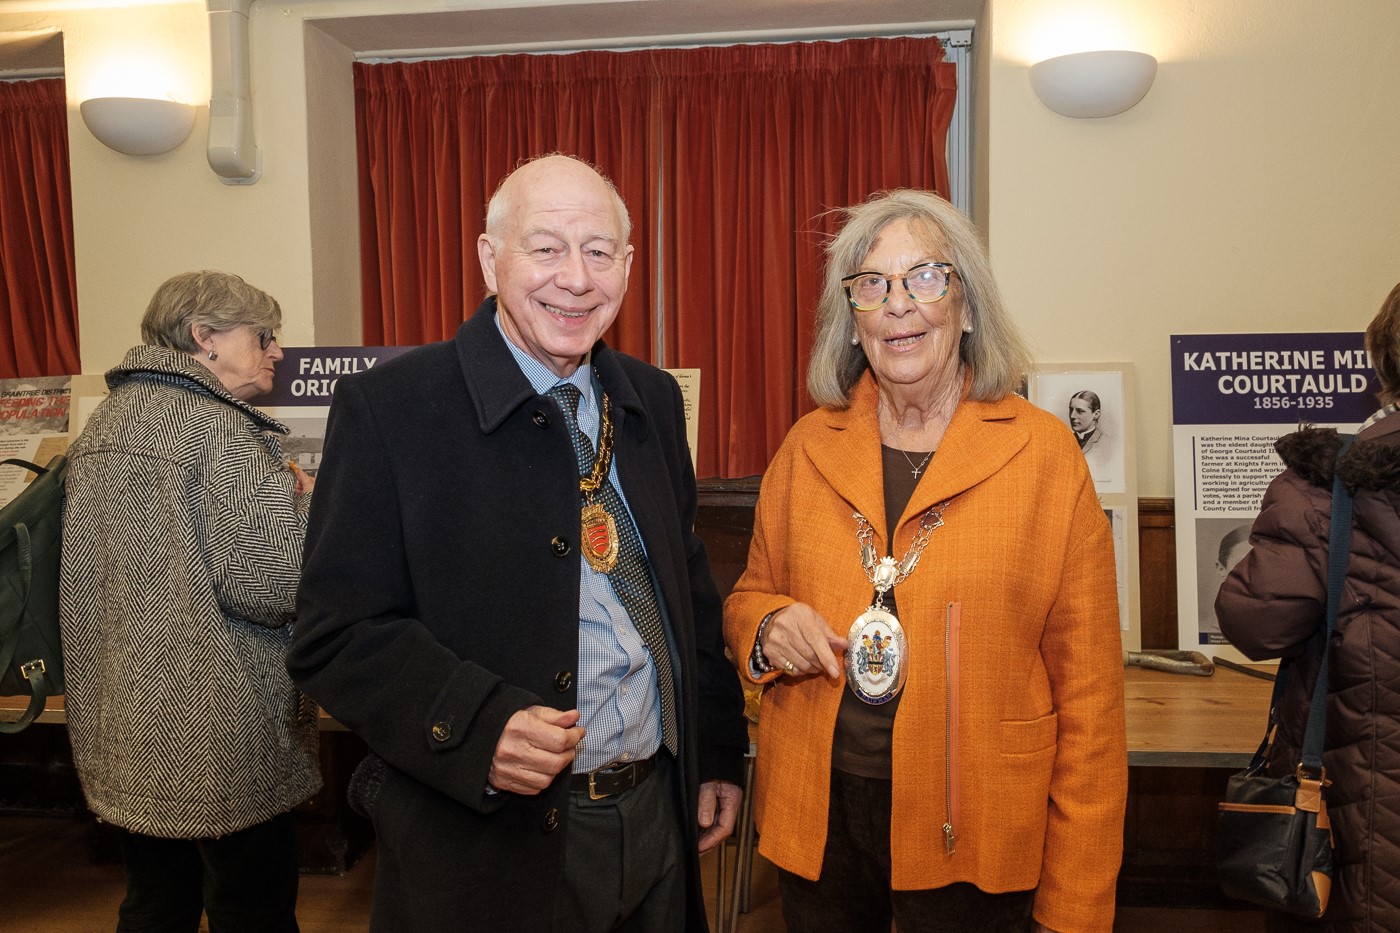 Cllr johnson and cllr wilson at Katherine Courtauld plaque unveiling event - Image